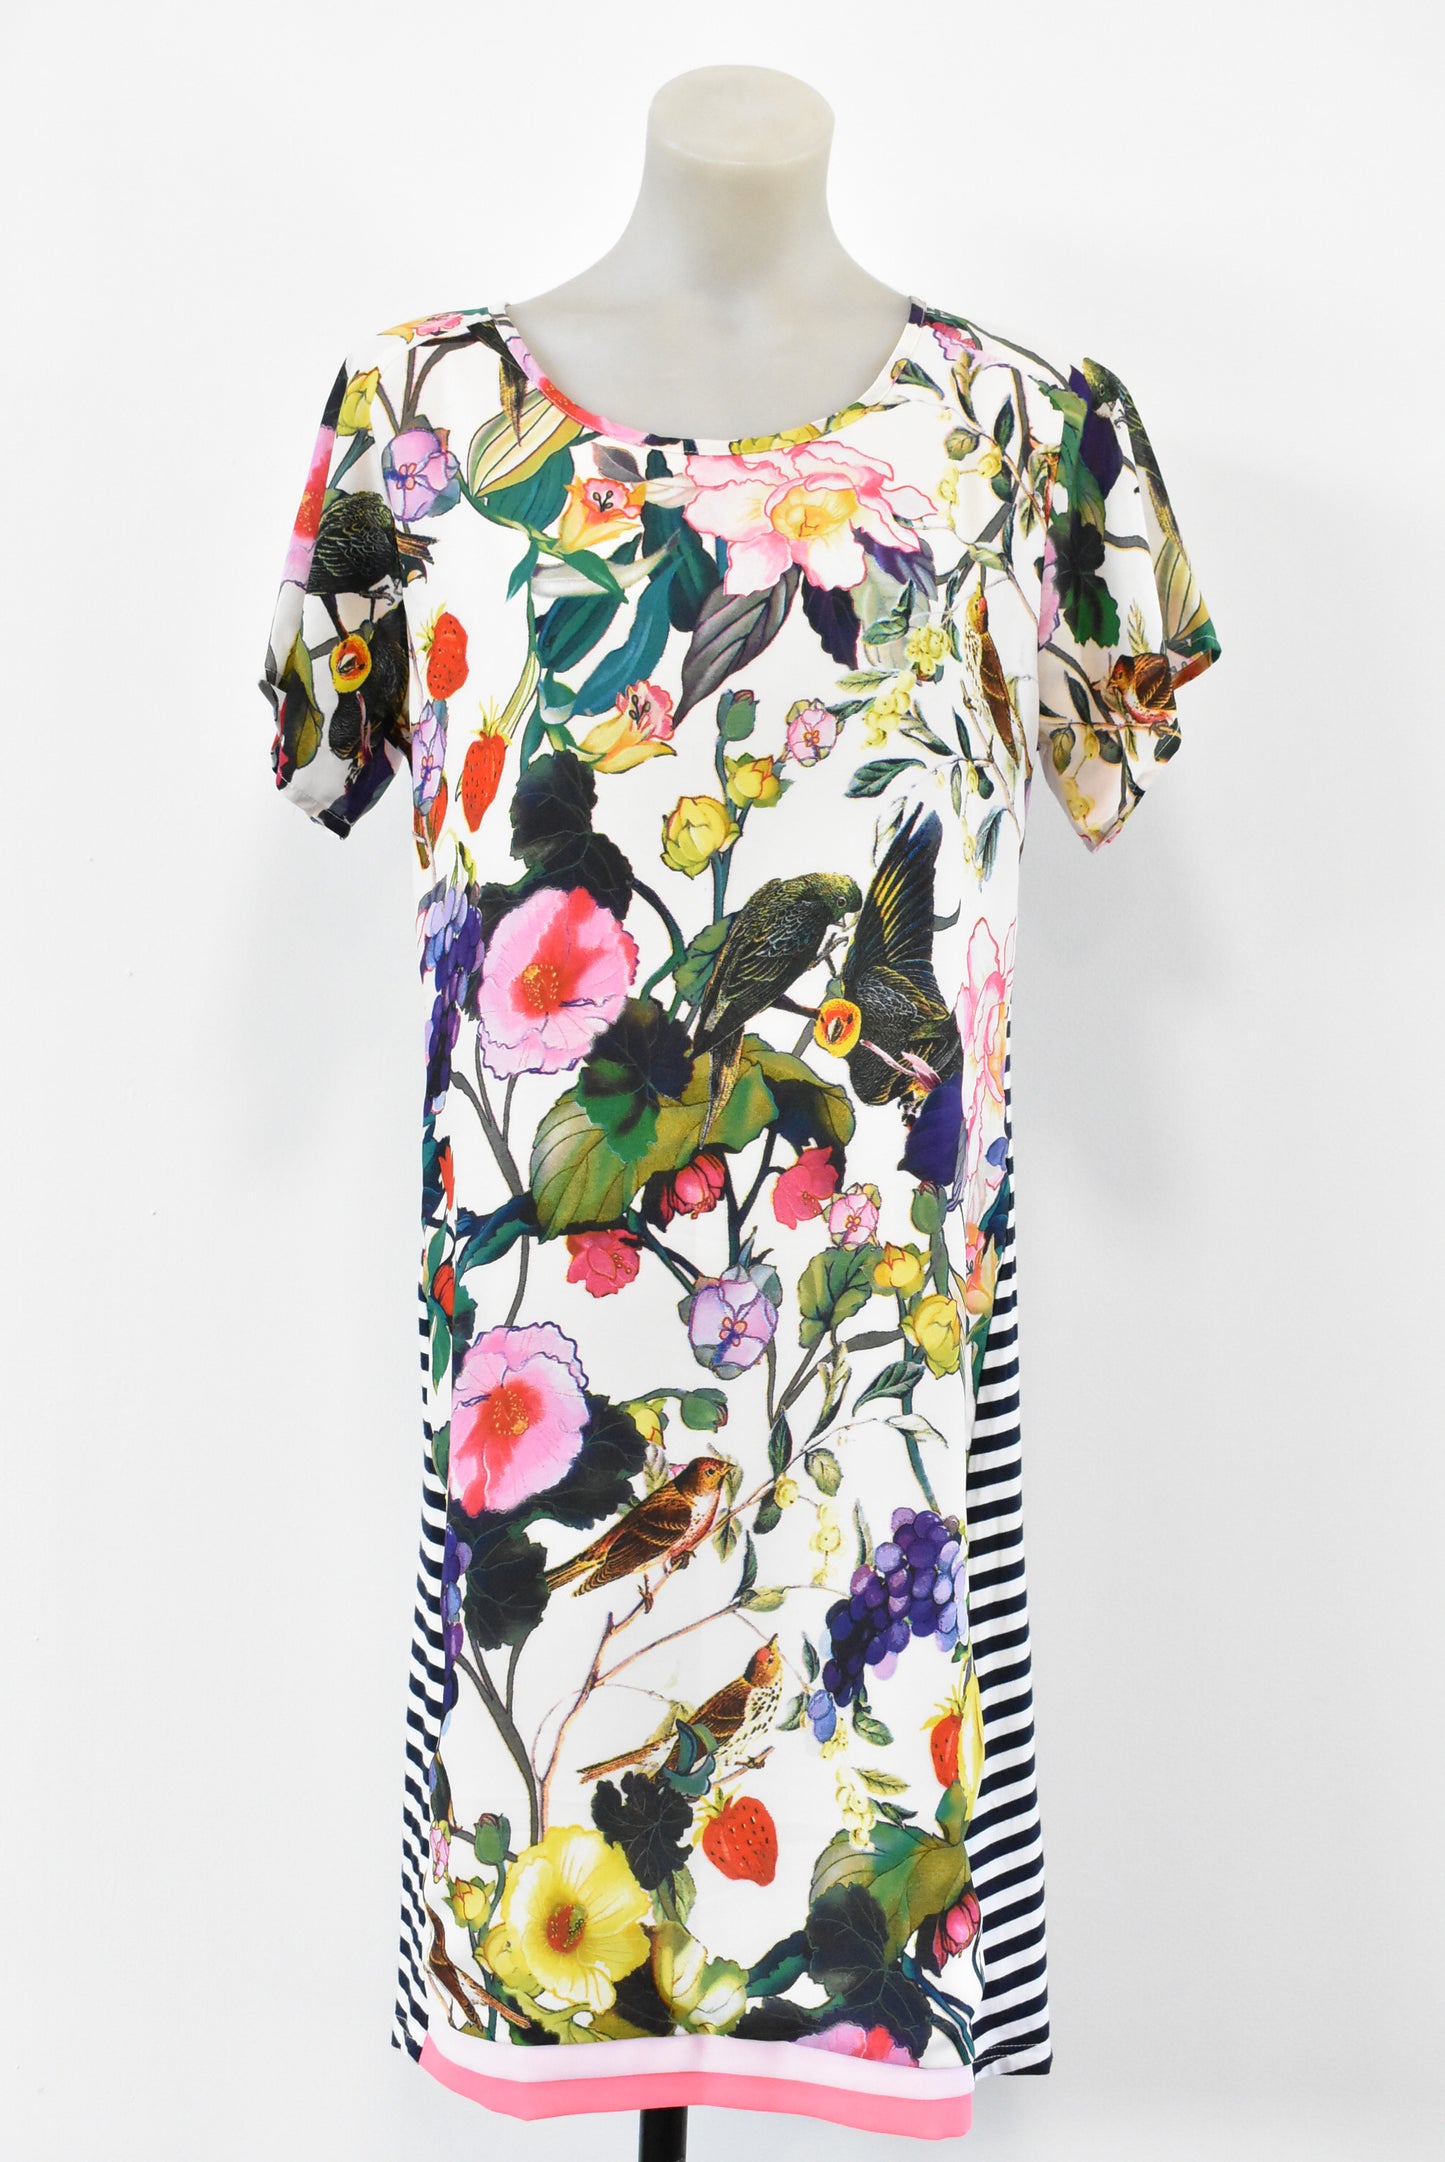 Charlo striped and floral dress